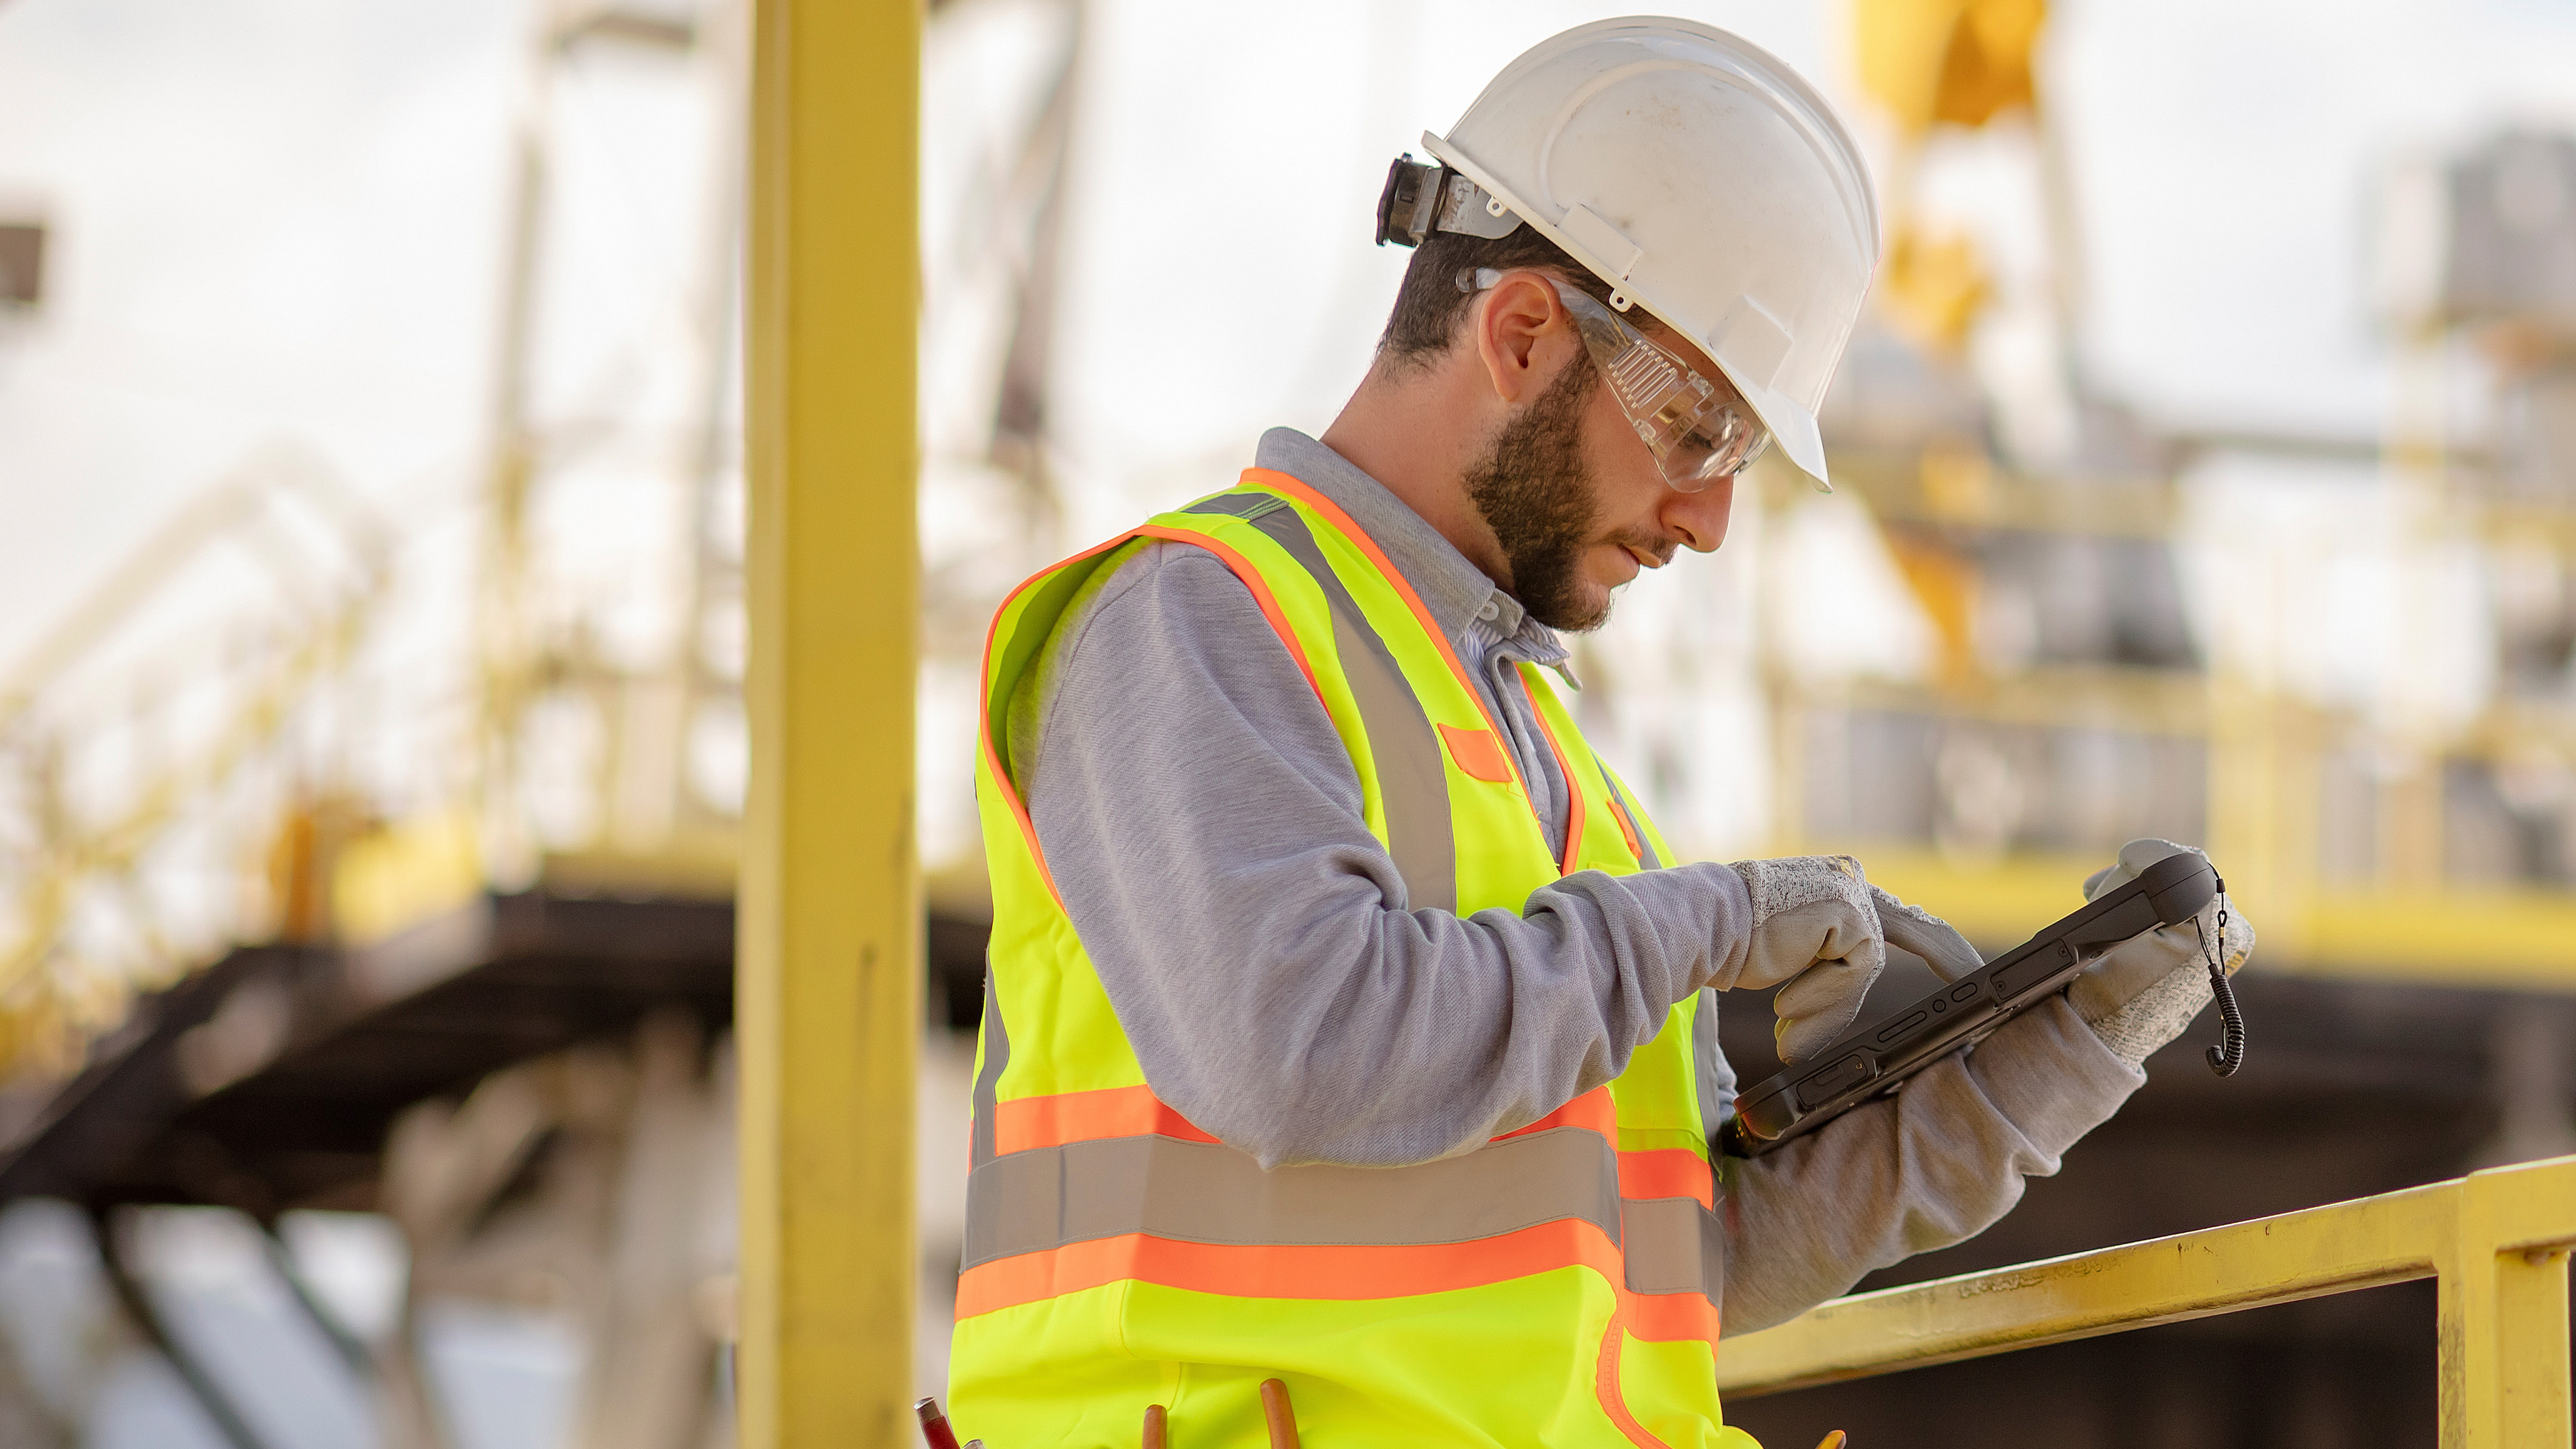 Utilities worker with white hard hat using a zebra tablet